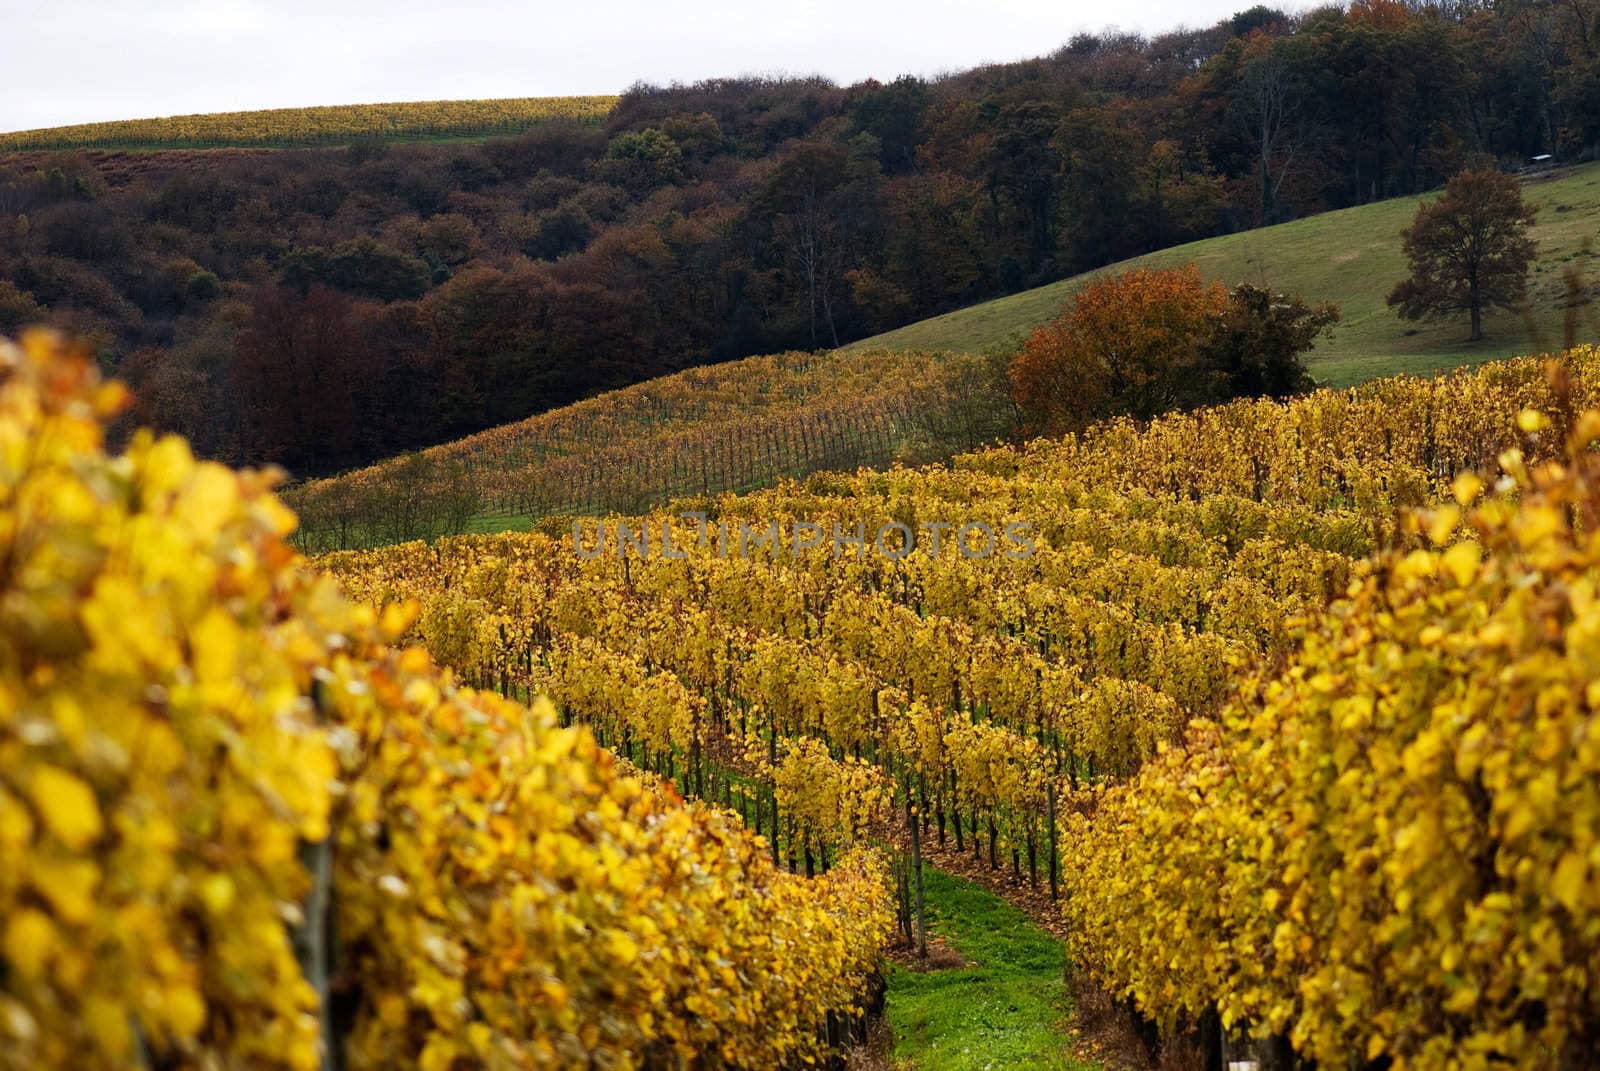 The vineyards in the Jurancon region of Southwest France, grow Gros Manseng and Petit Manseng grapes for sweet white wine.